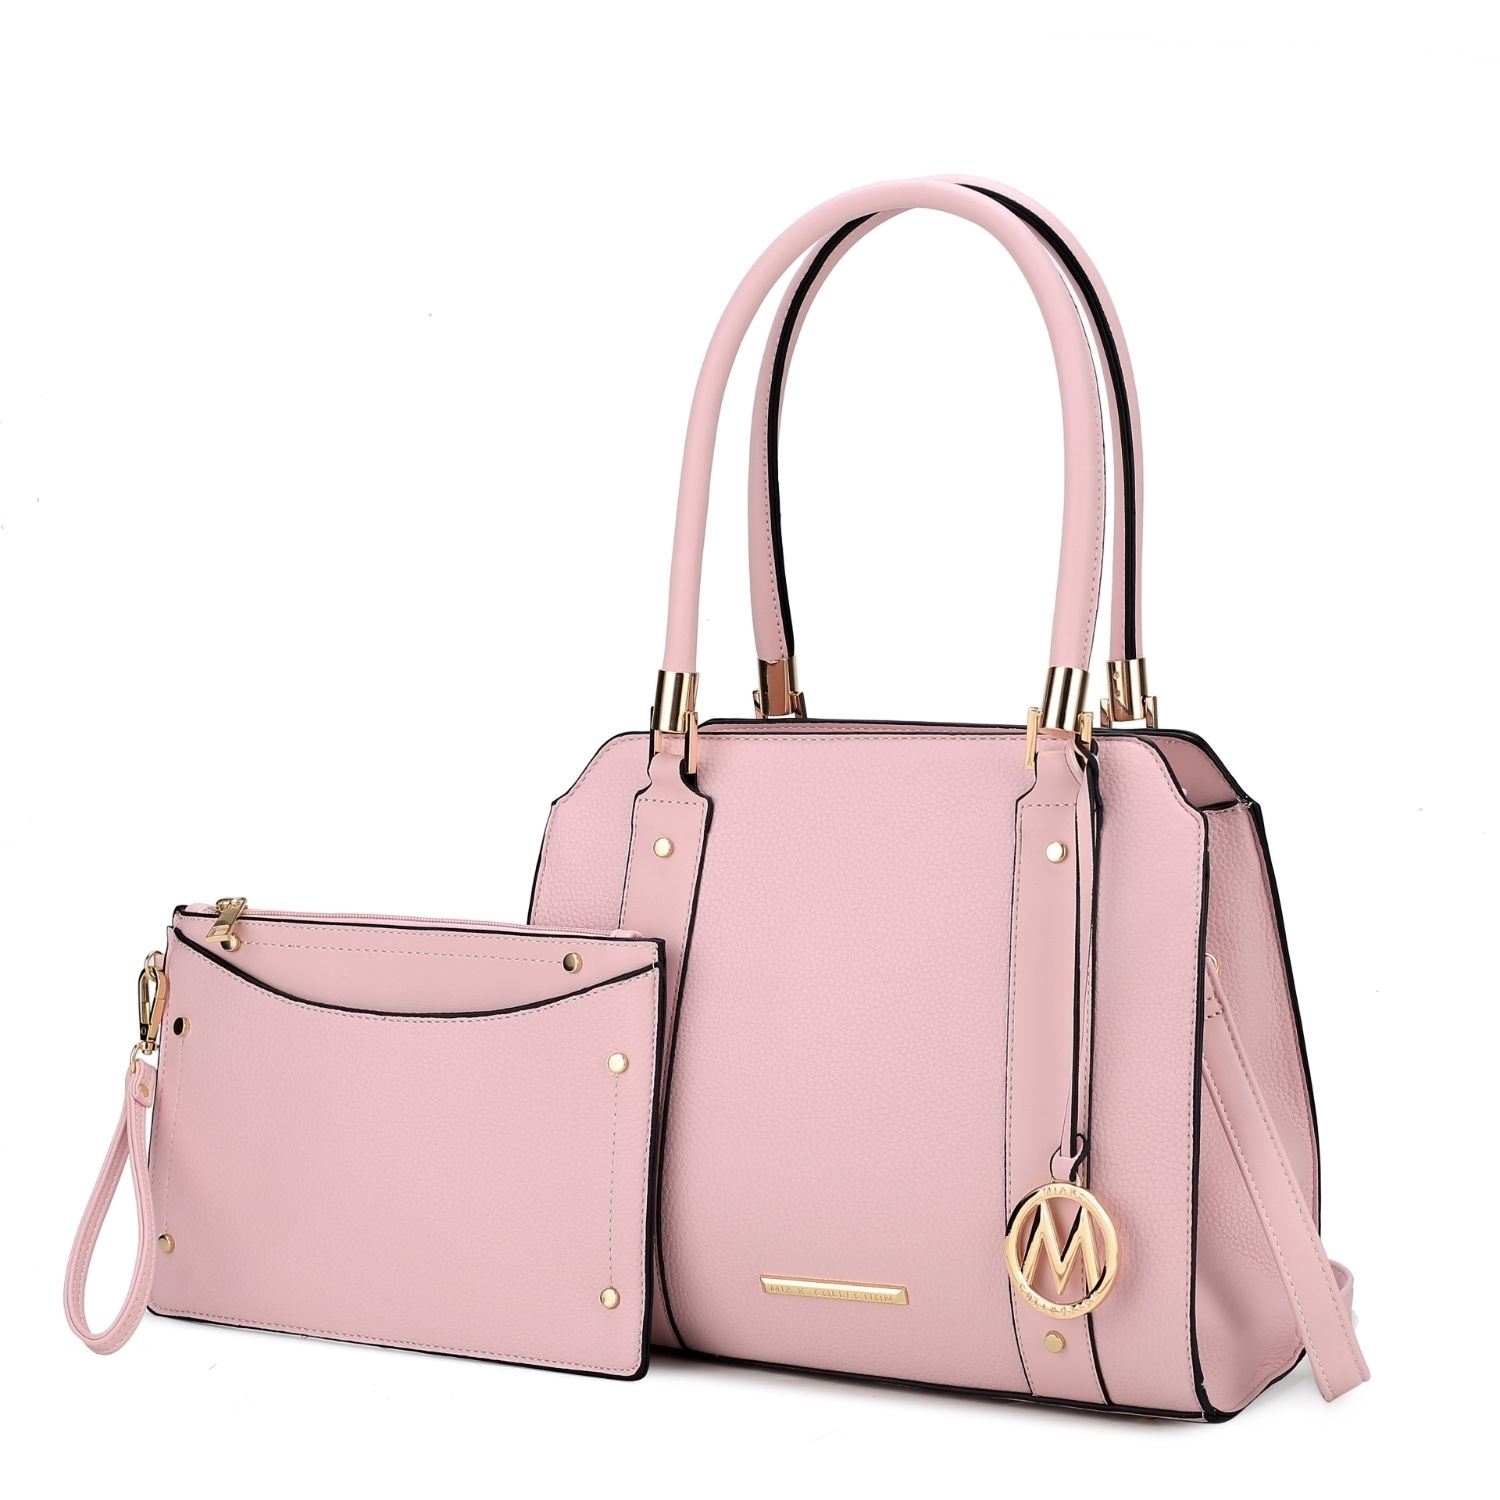 MKF Collection Norah Vegan Leather Women's Satchel Bag With Wristlet -2 Pieces By Mia K - Pink